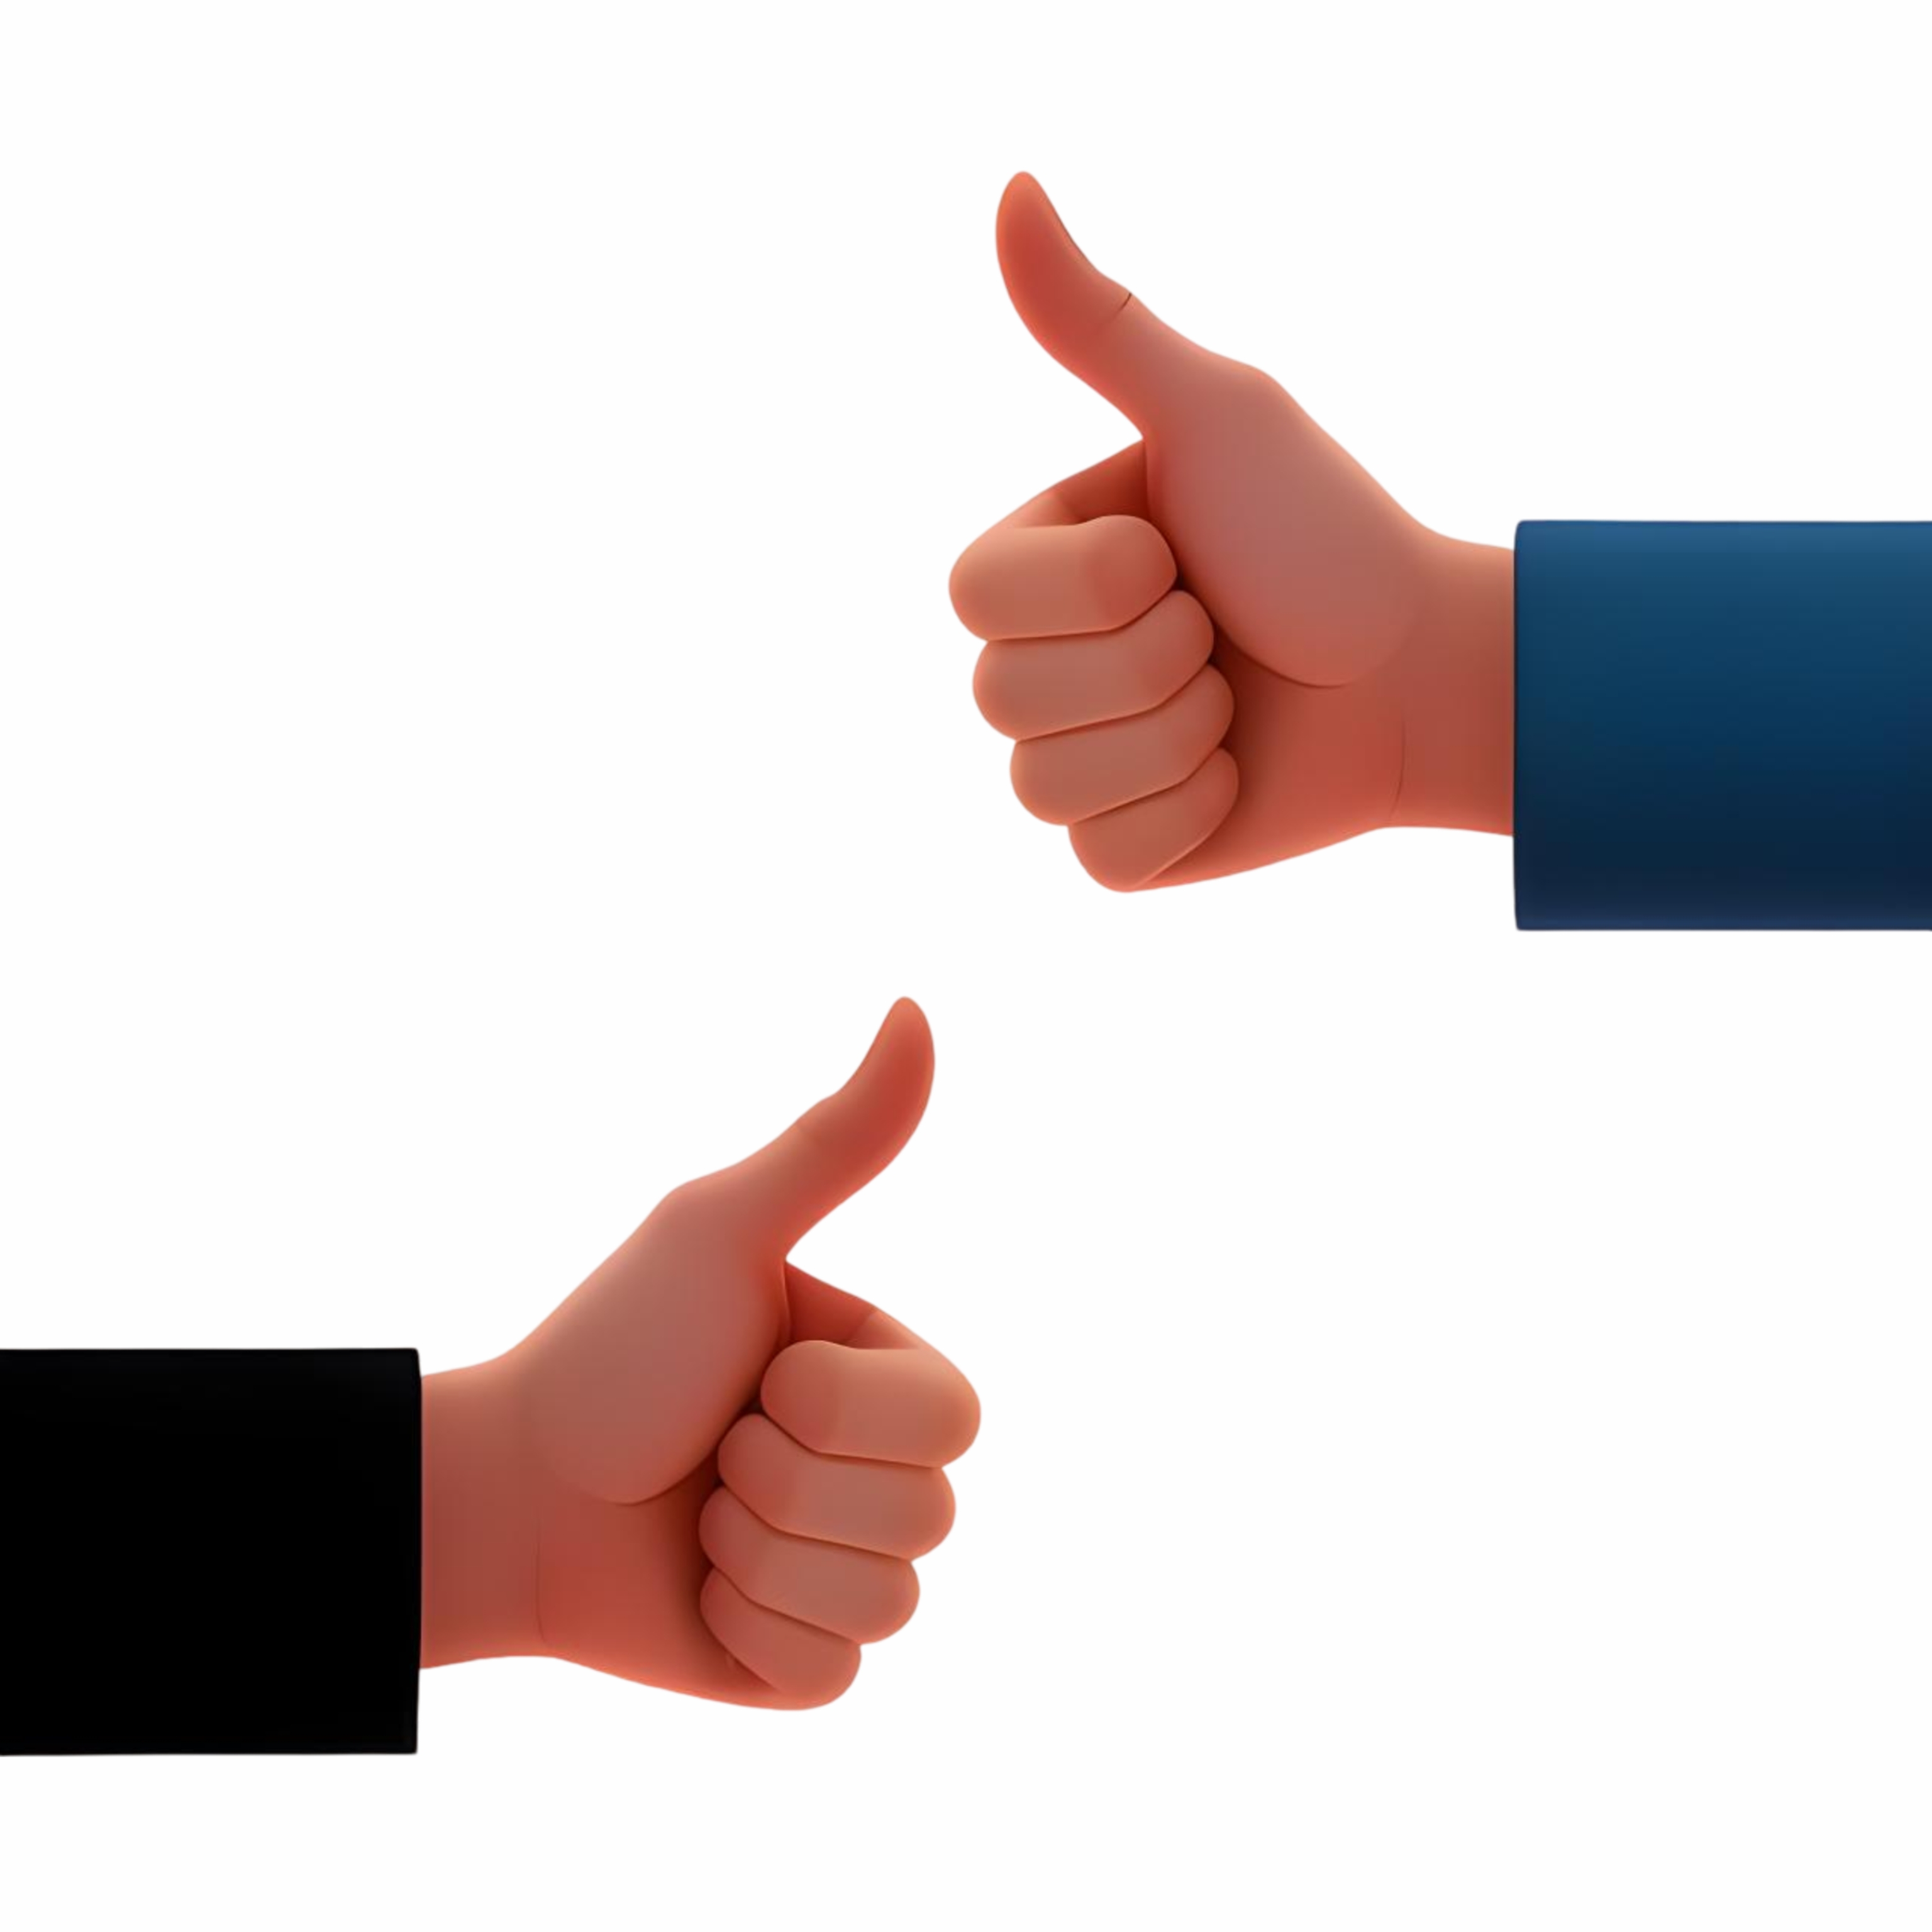 Thumbs up graphic design